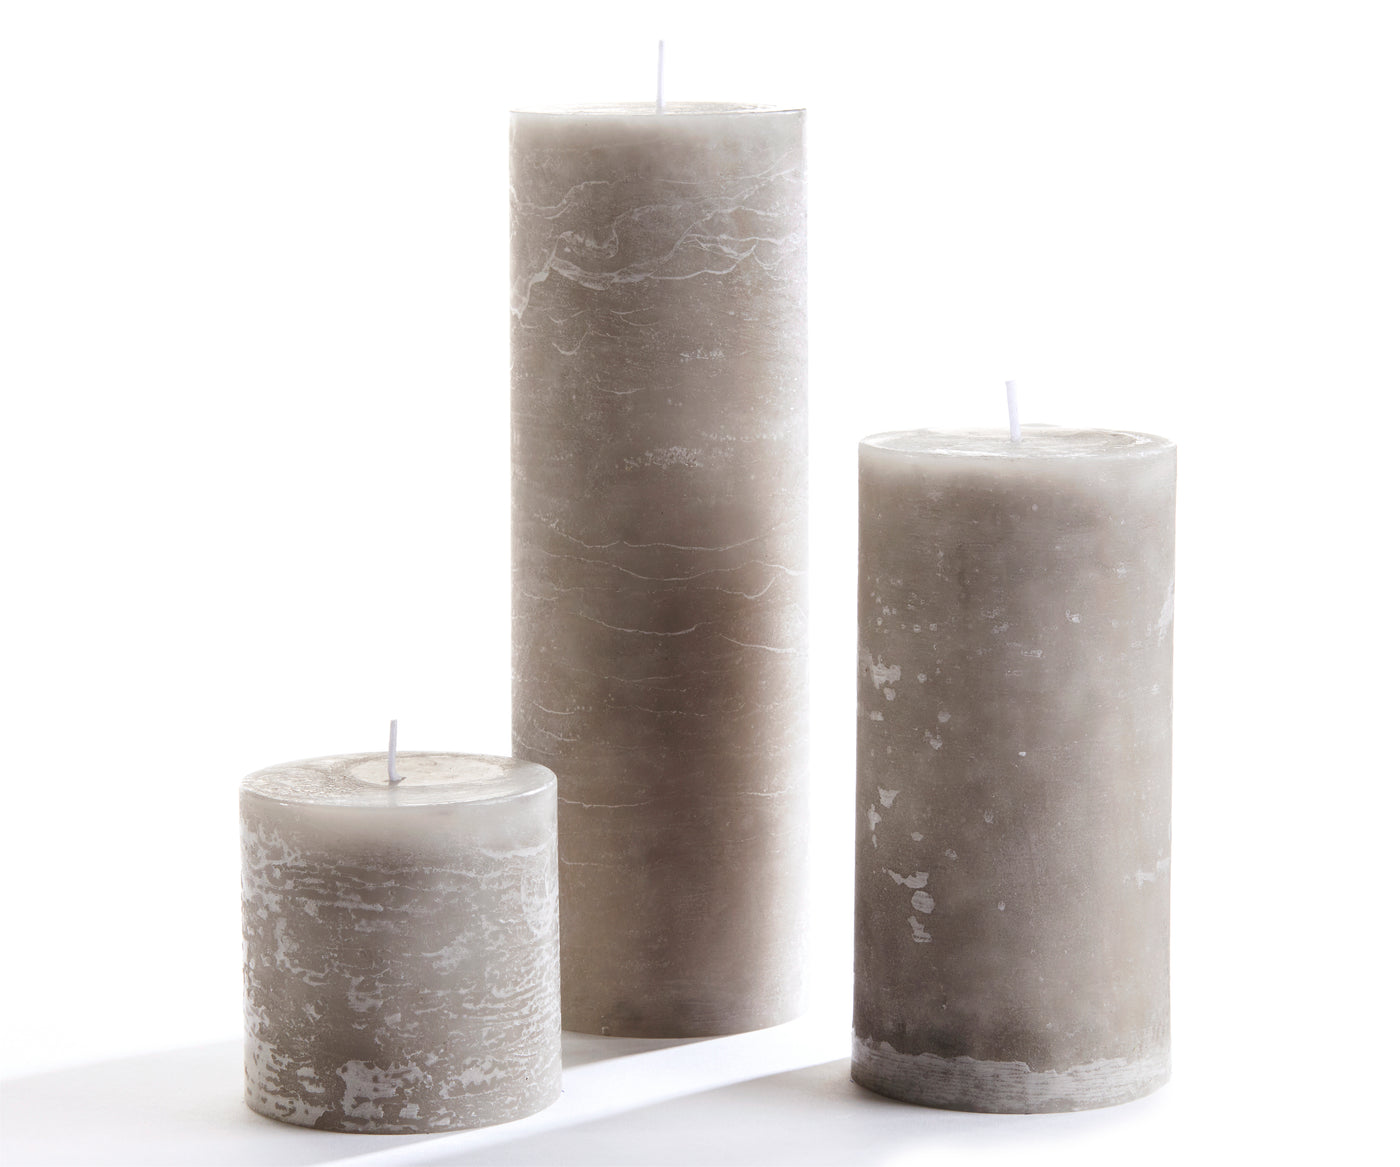 3x3 Rustic Unscented Pillar Candle-Grey